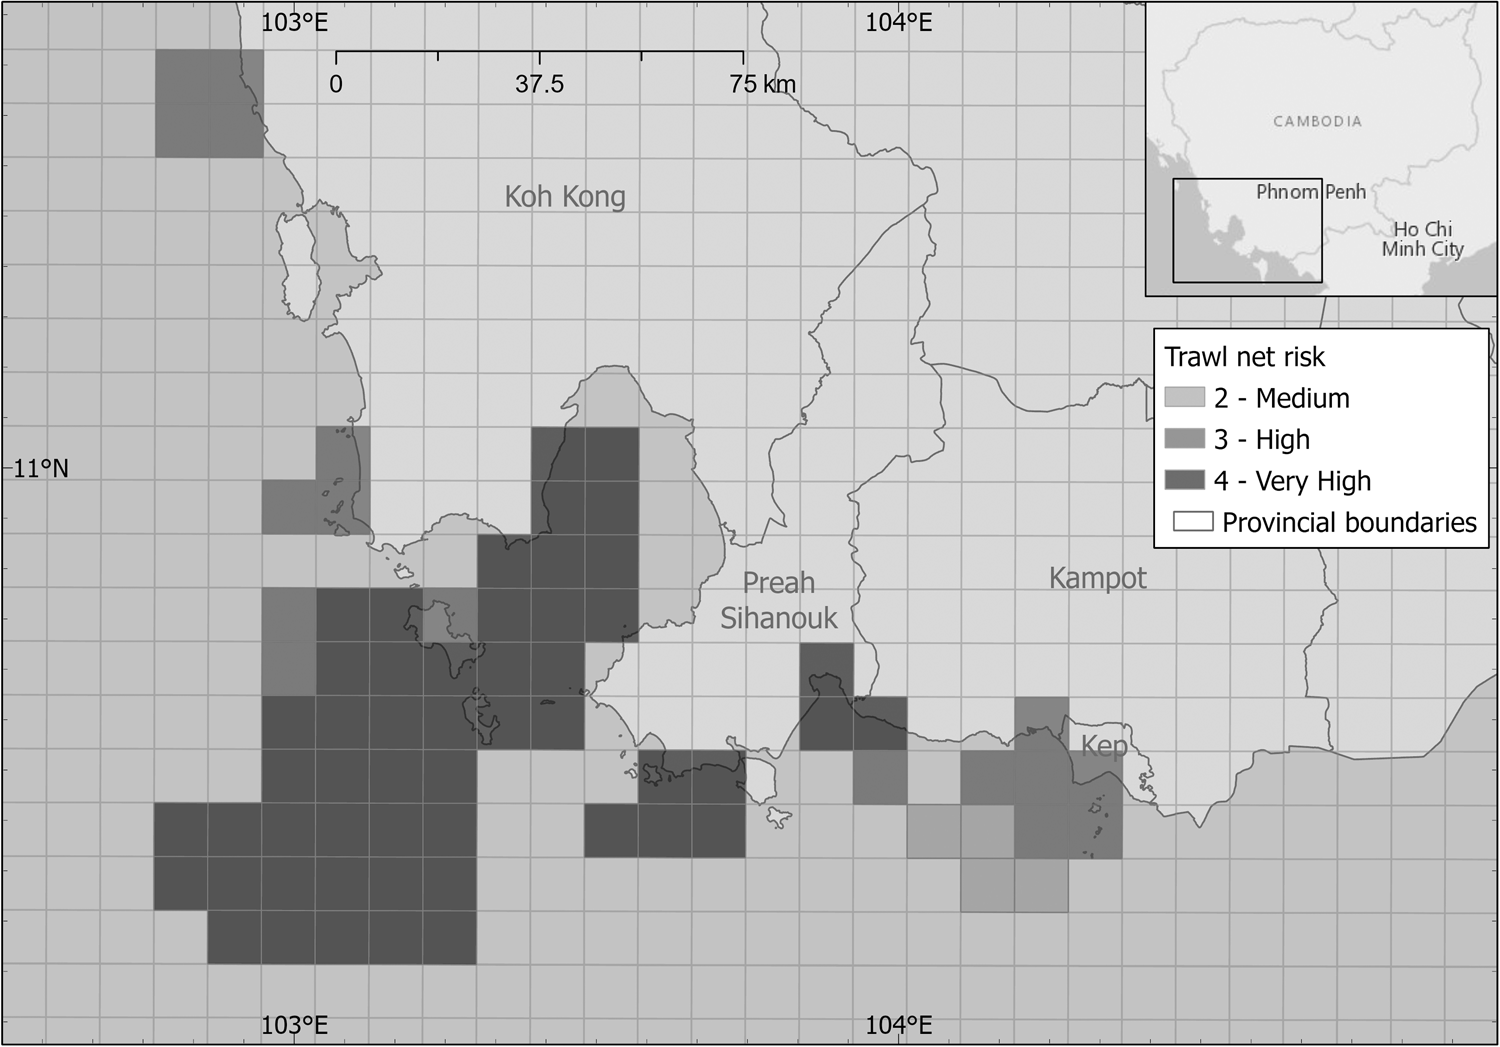 An assessment of marine turtle population status and conservation